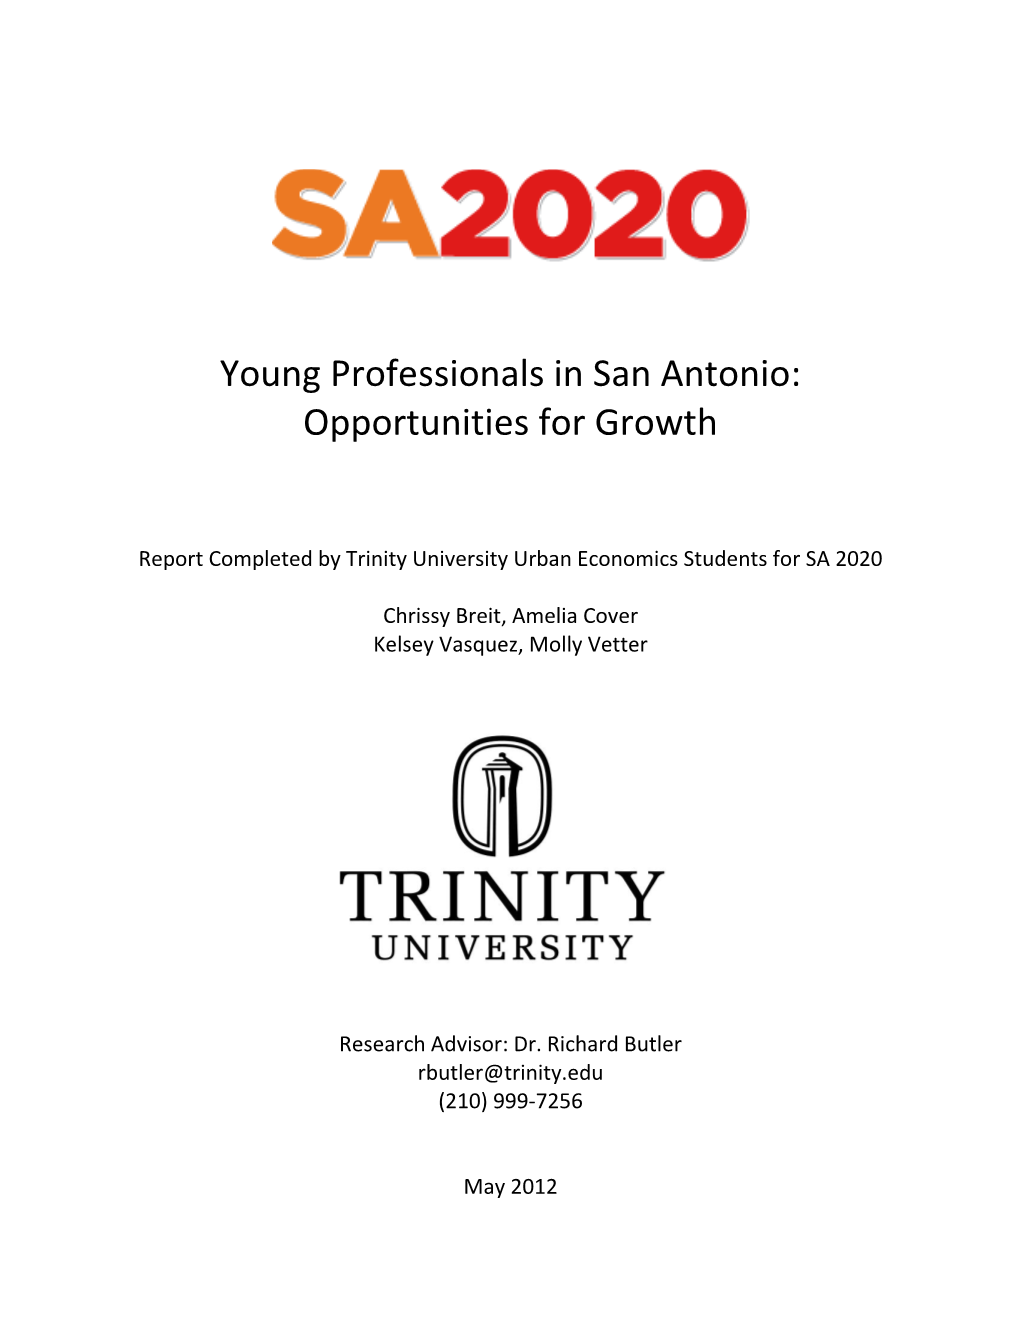 Young Professionals in San Antonio: Opportunities for Growth